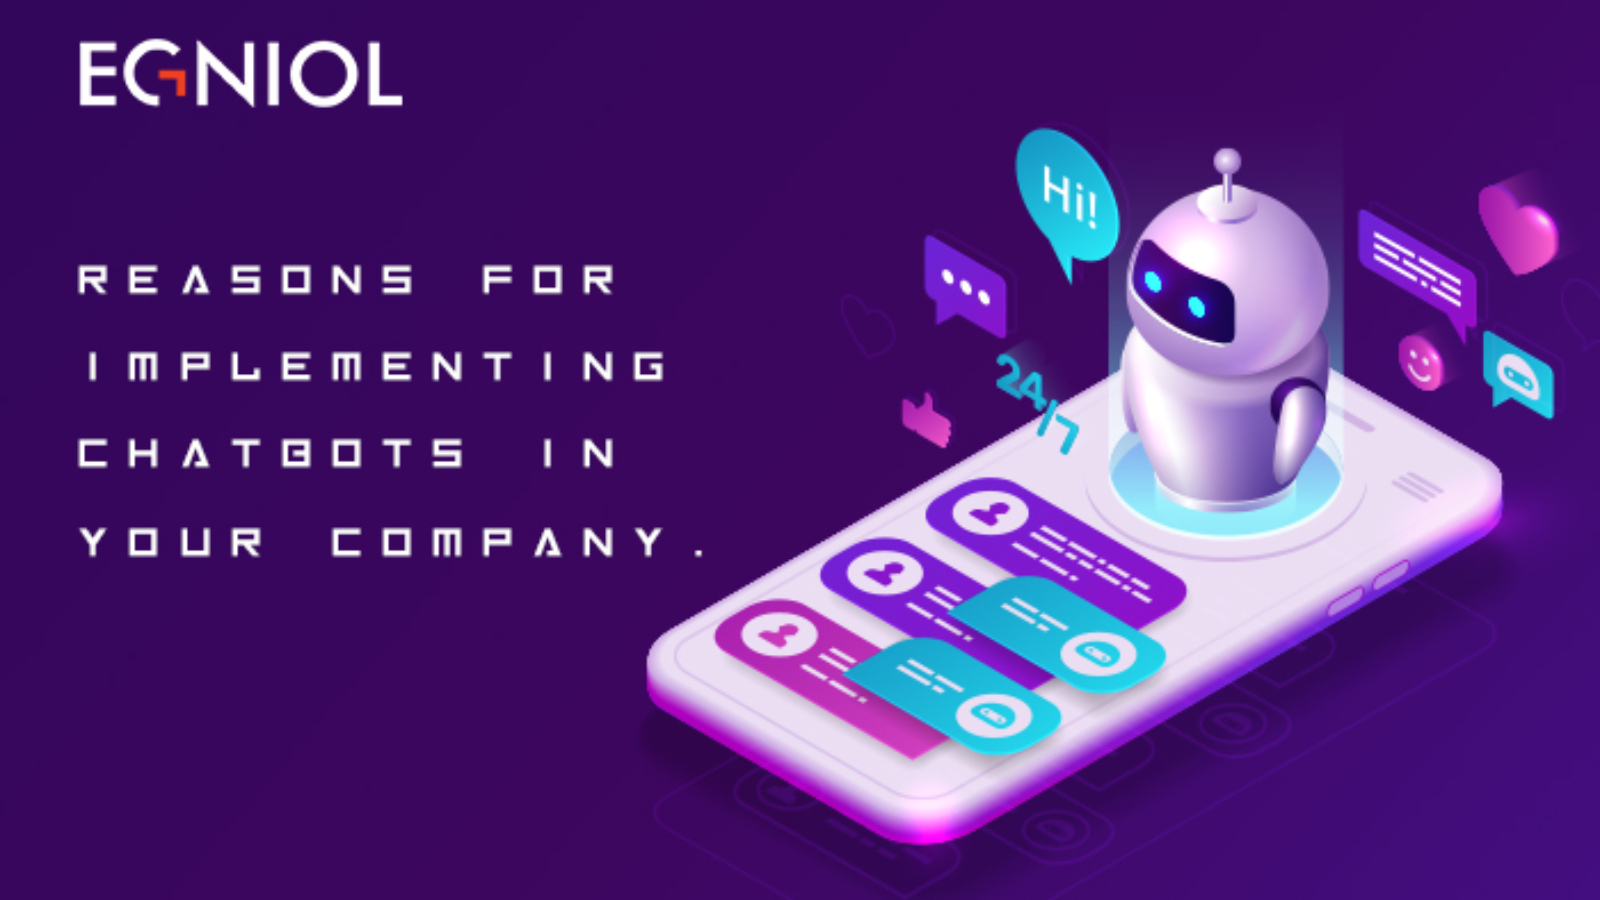 Benefits of Implementing Chatbots - By Egniol